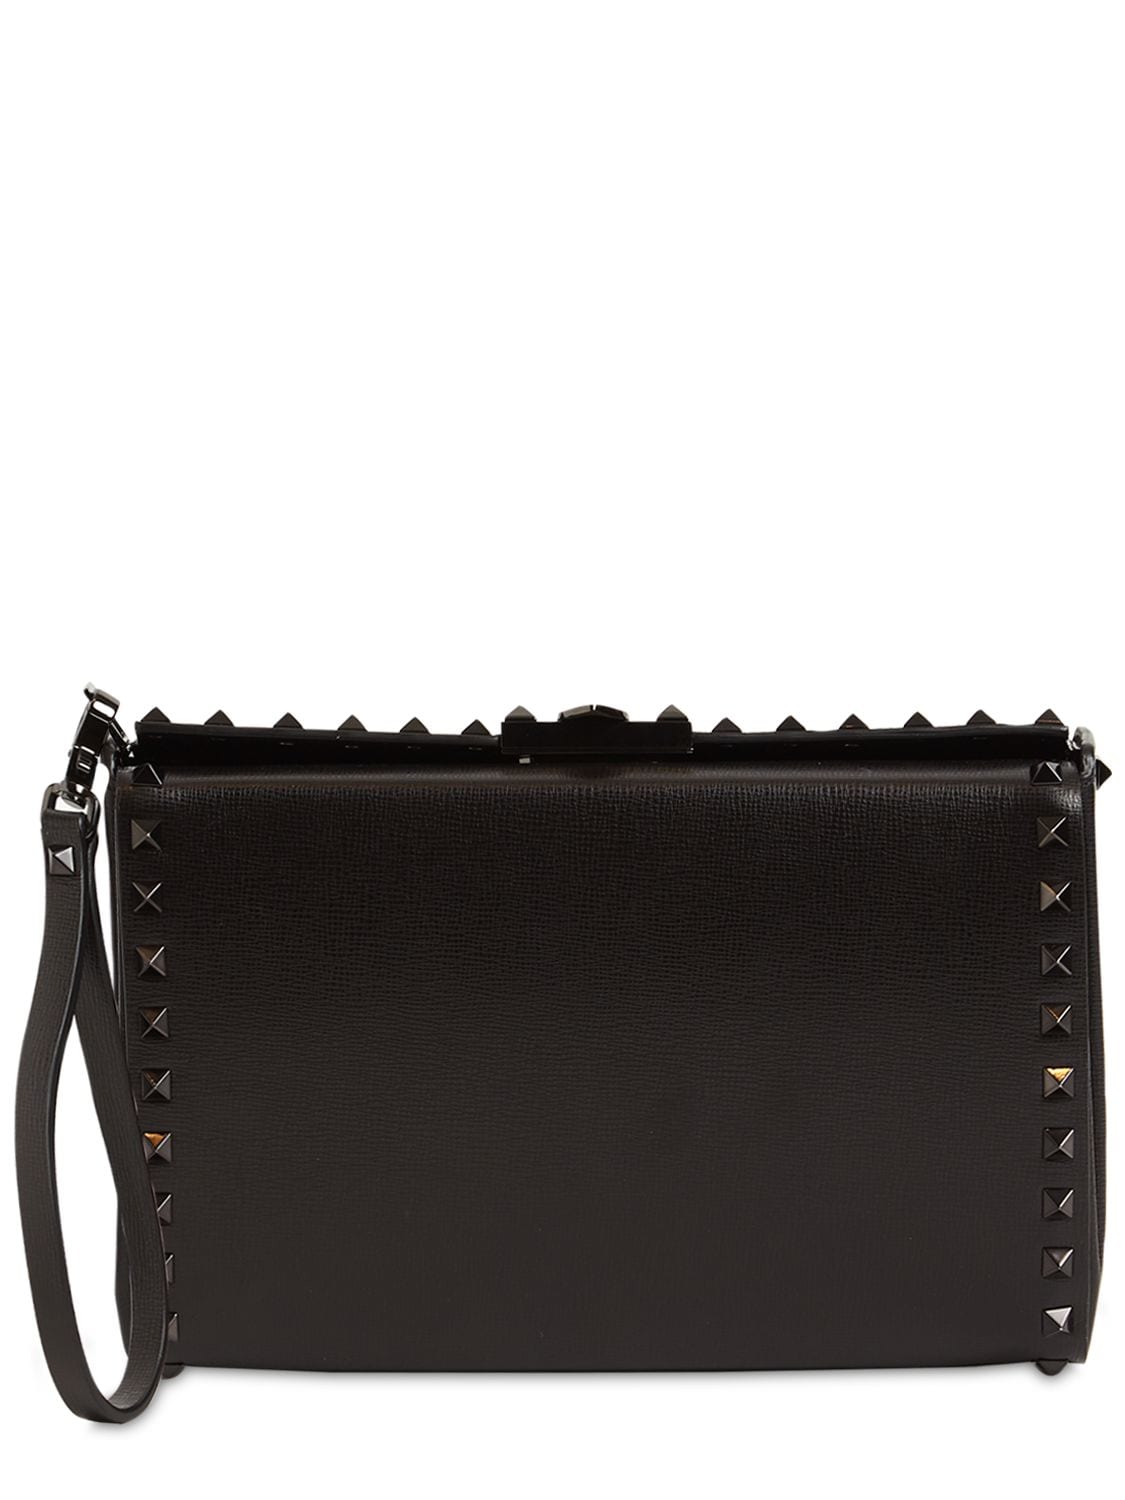 Image of Ruthenio Studs Leather Pouch